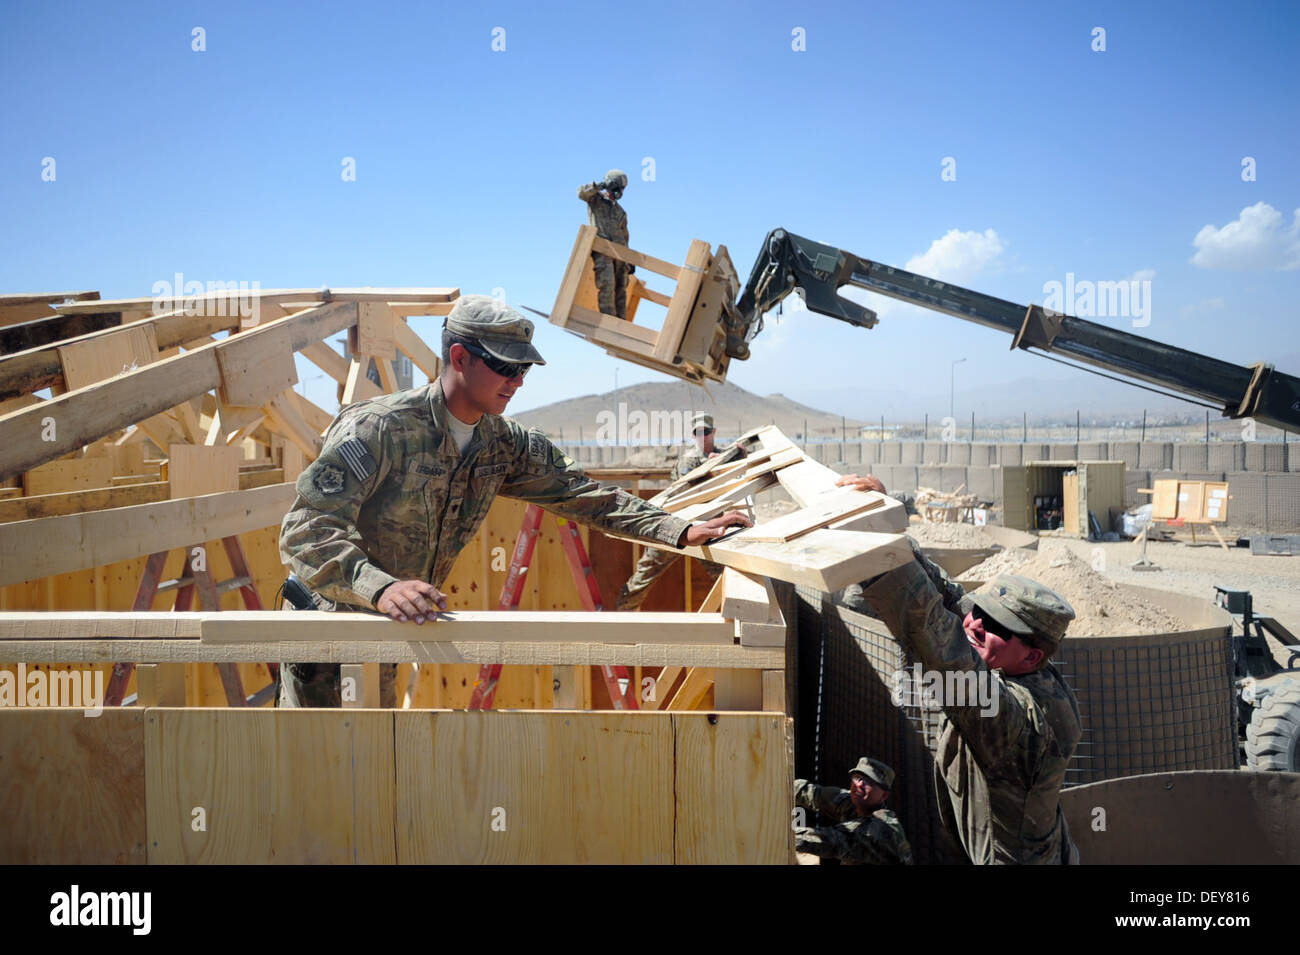 PAKTYA PROVINCE, Afghanistan – U.S. Army Soldiers with the 149th Vertical Construction Company, Kentucky National Guard, lift a Stock Photo